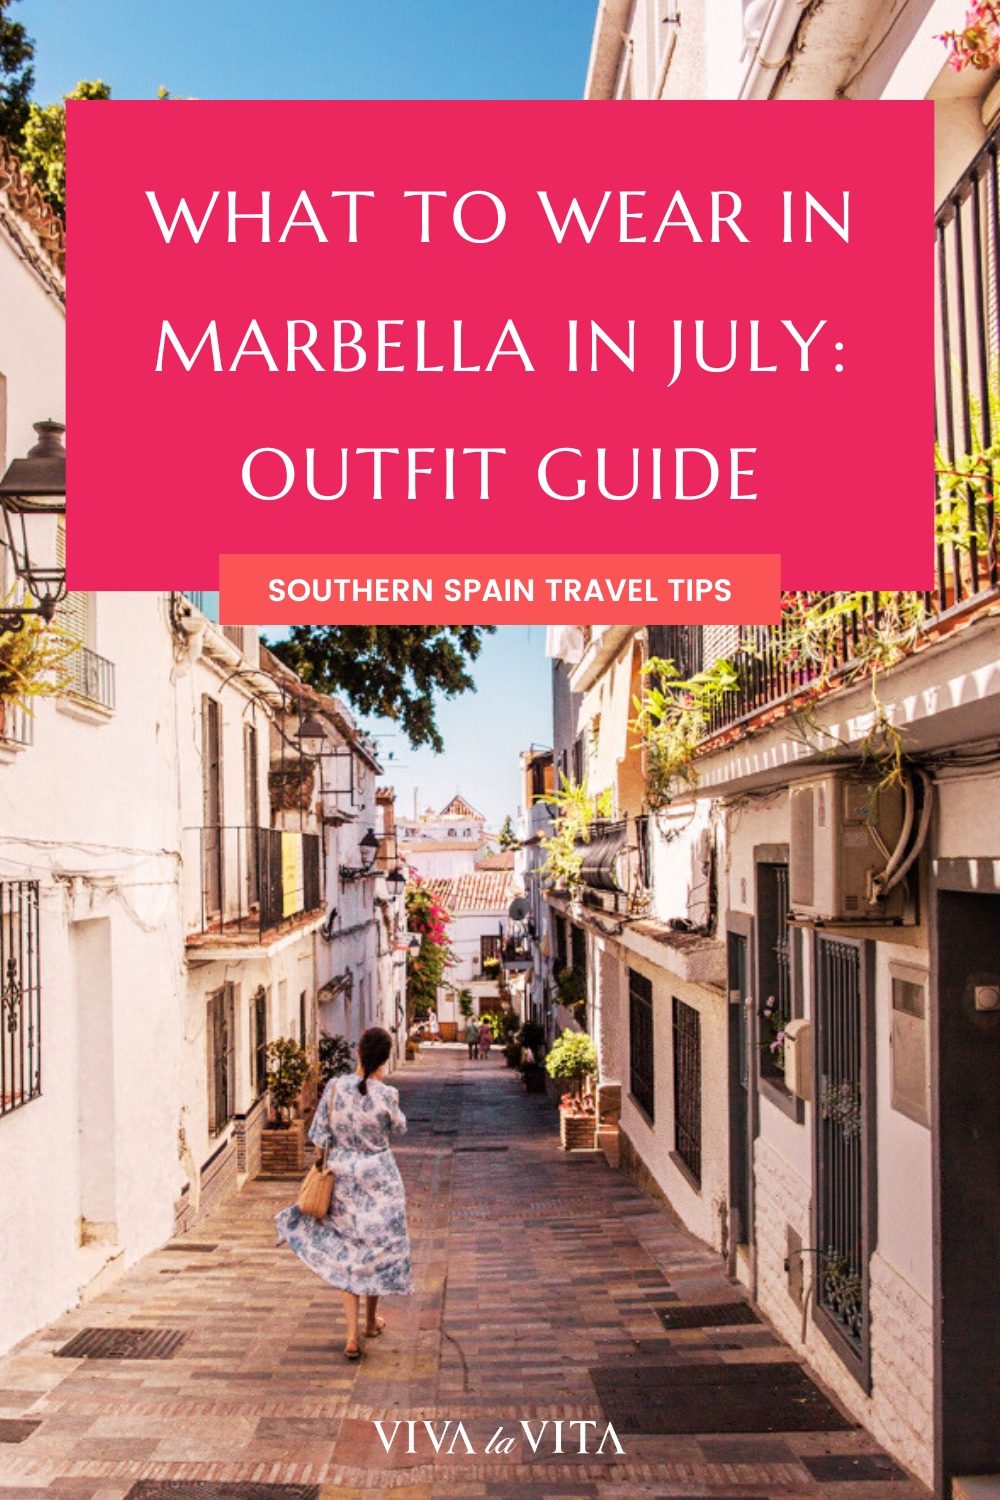 PIn image for an article about what to wear in marbella in July